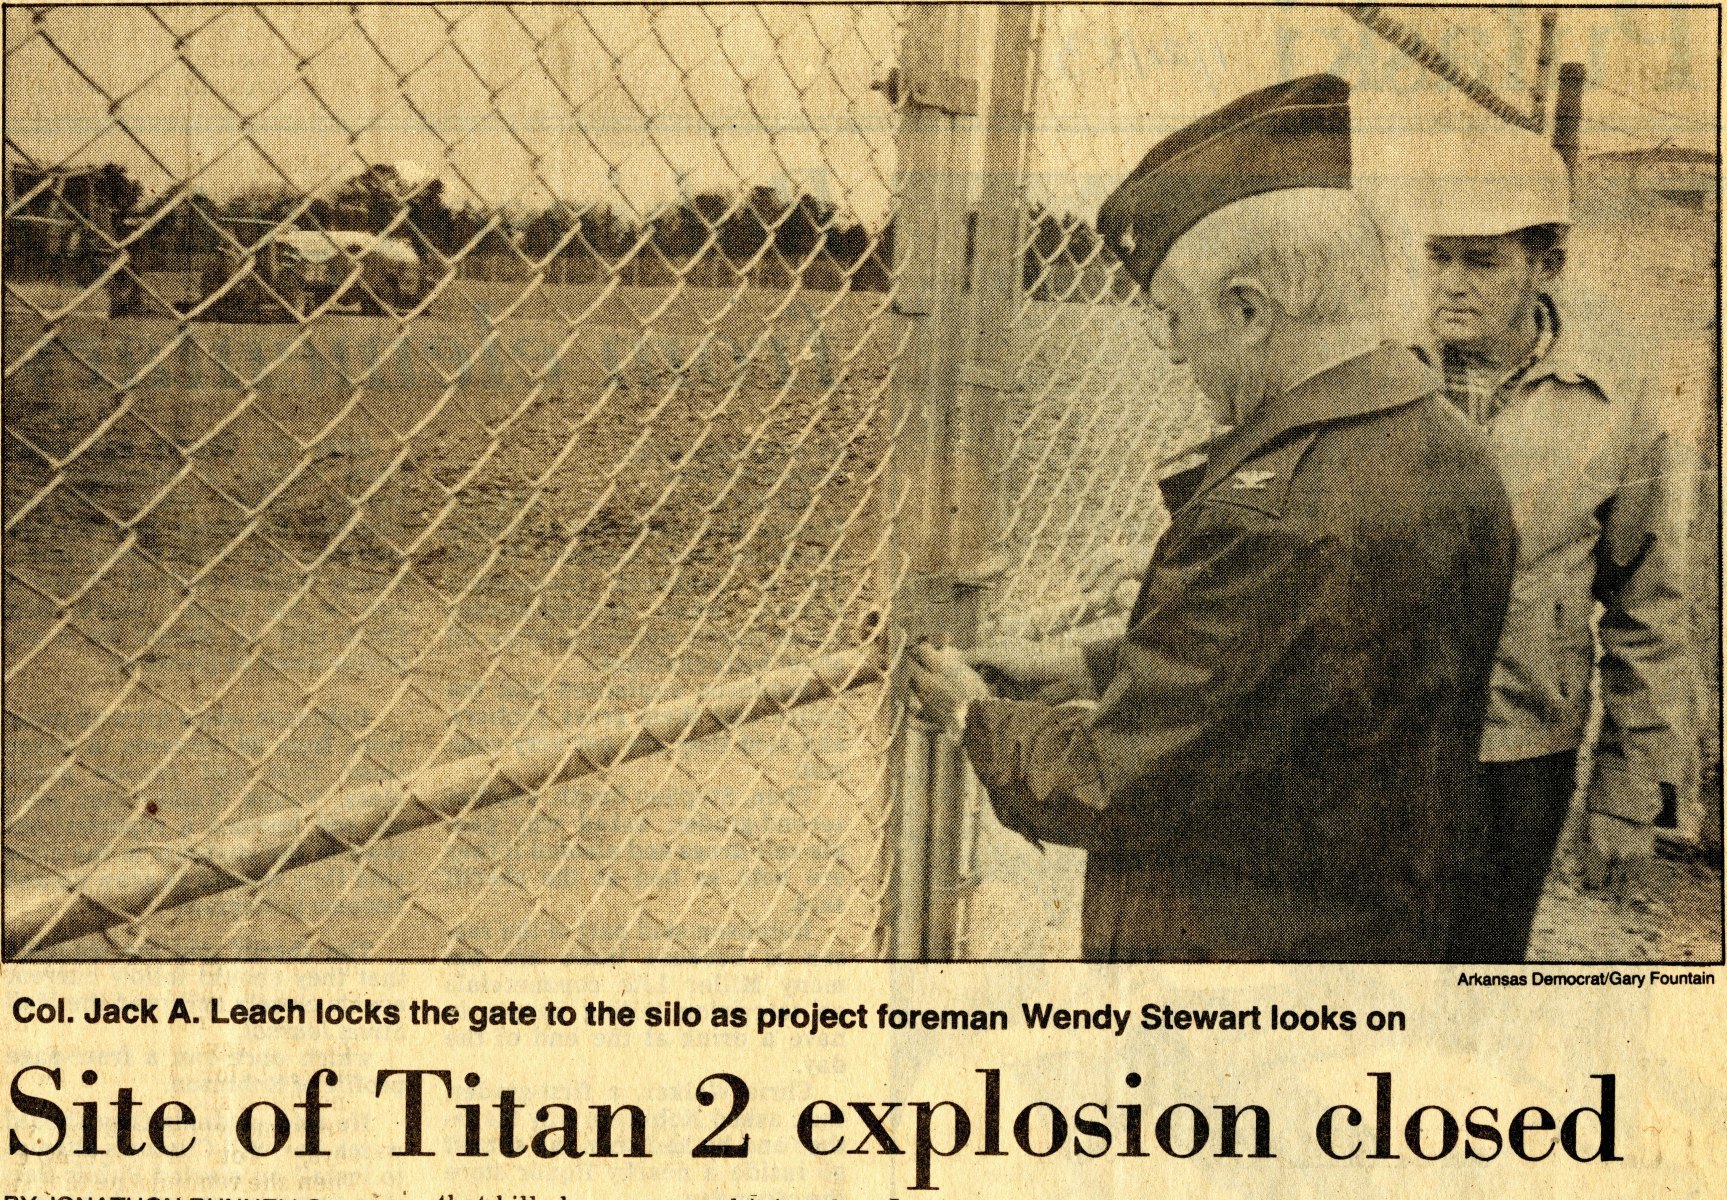 Newspaper photograph: Col. Jack A. Leach locks the gate to the silo as project foreman Wendy Stewart looks on. The headline reads, " Site of Titan 2 explosion closed."